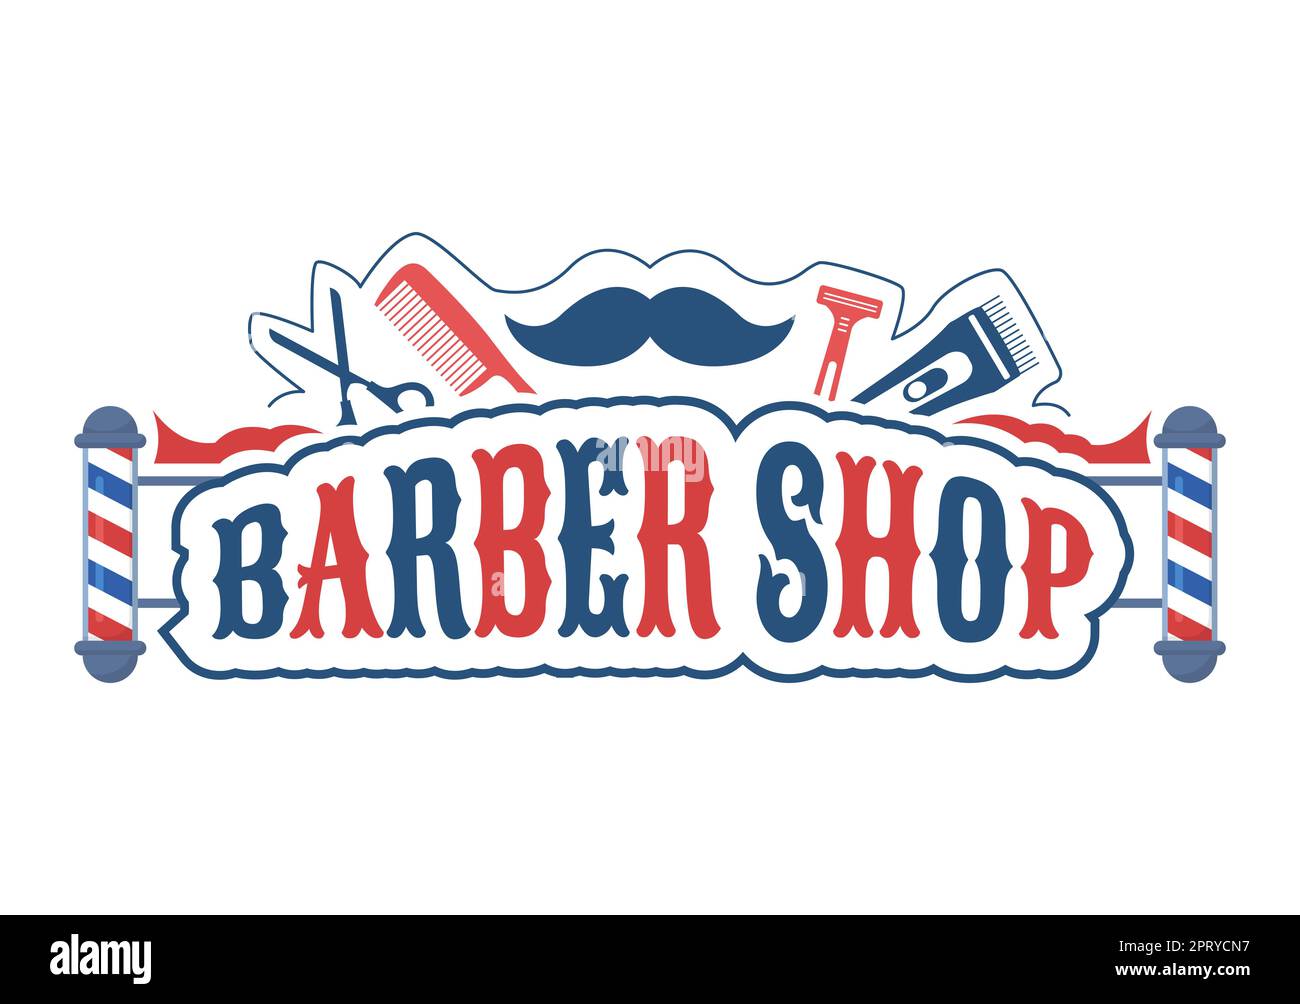 Barber shop Cut Out Stock Images & Pictures - Page 3 - Alamy